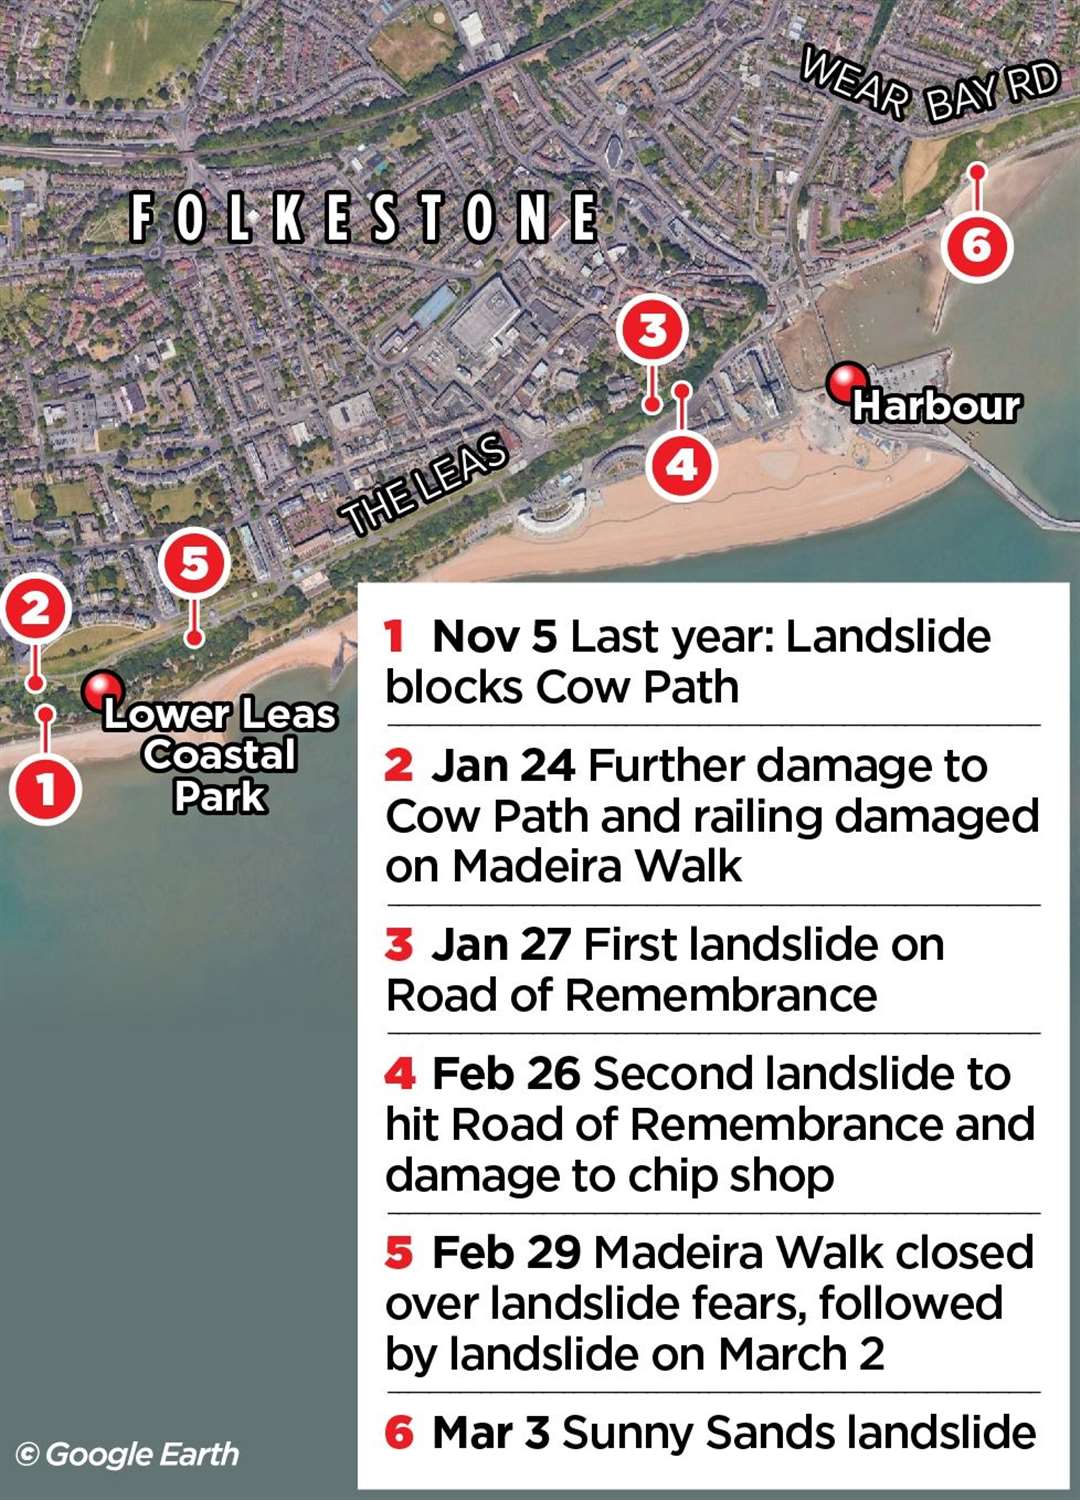 The five landslides that have impacted the Folkestone coastlines in recent months and the damage they have caused.